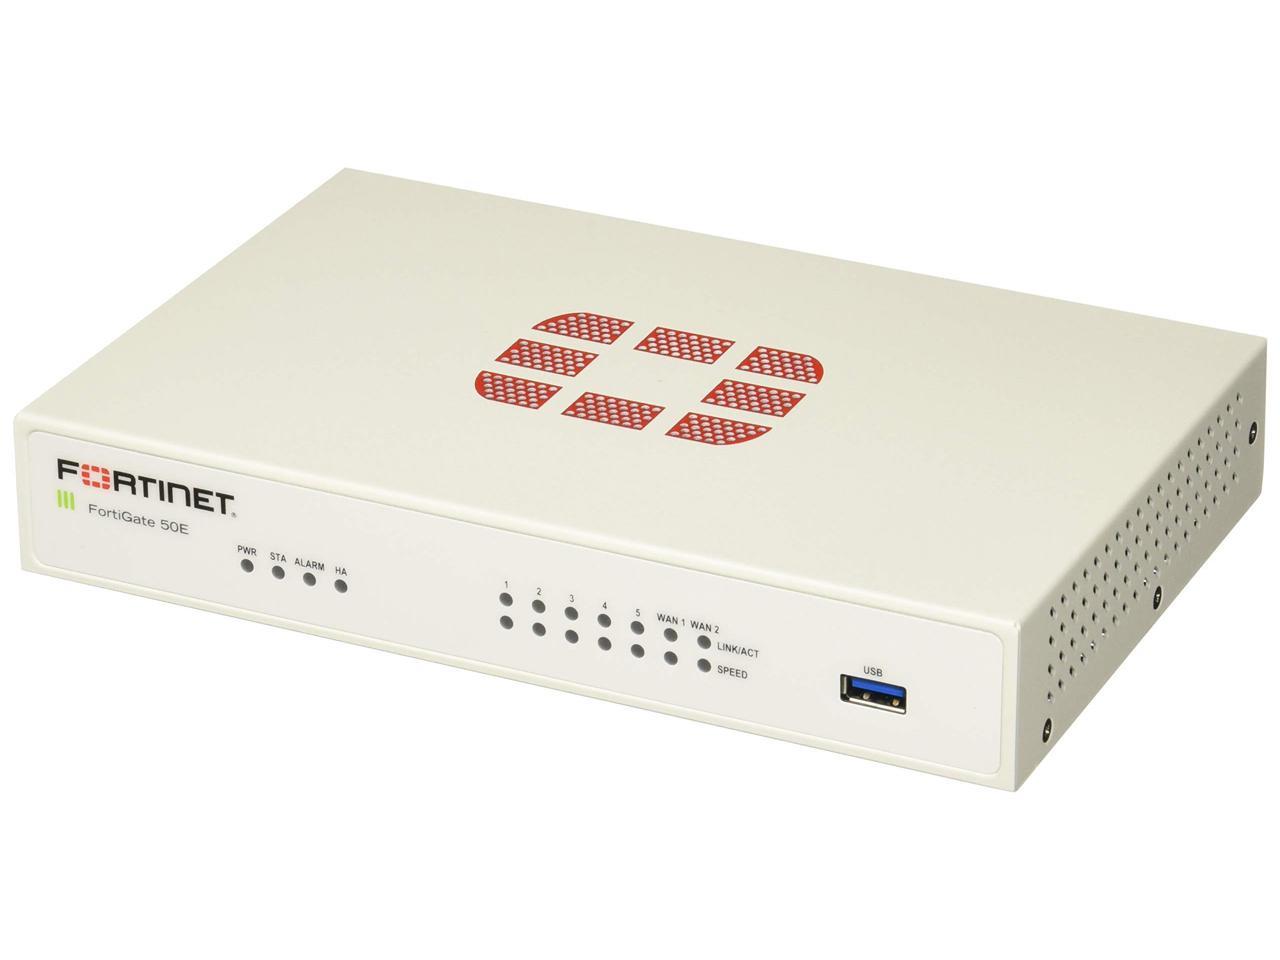 Fortinet fg50e free download facebook photo zoom google chrome